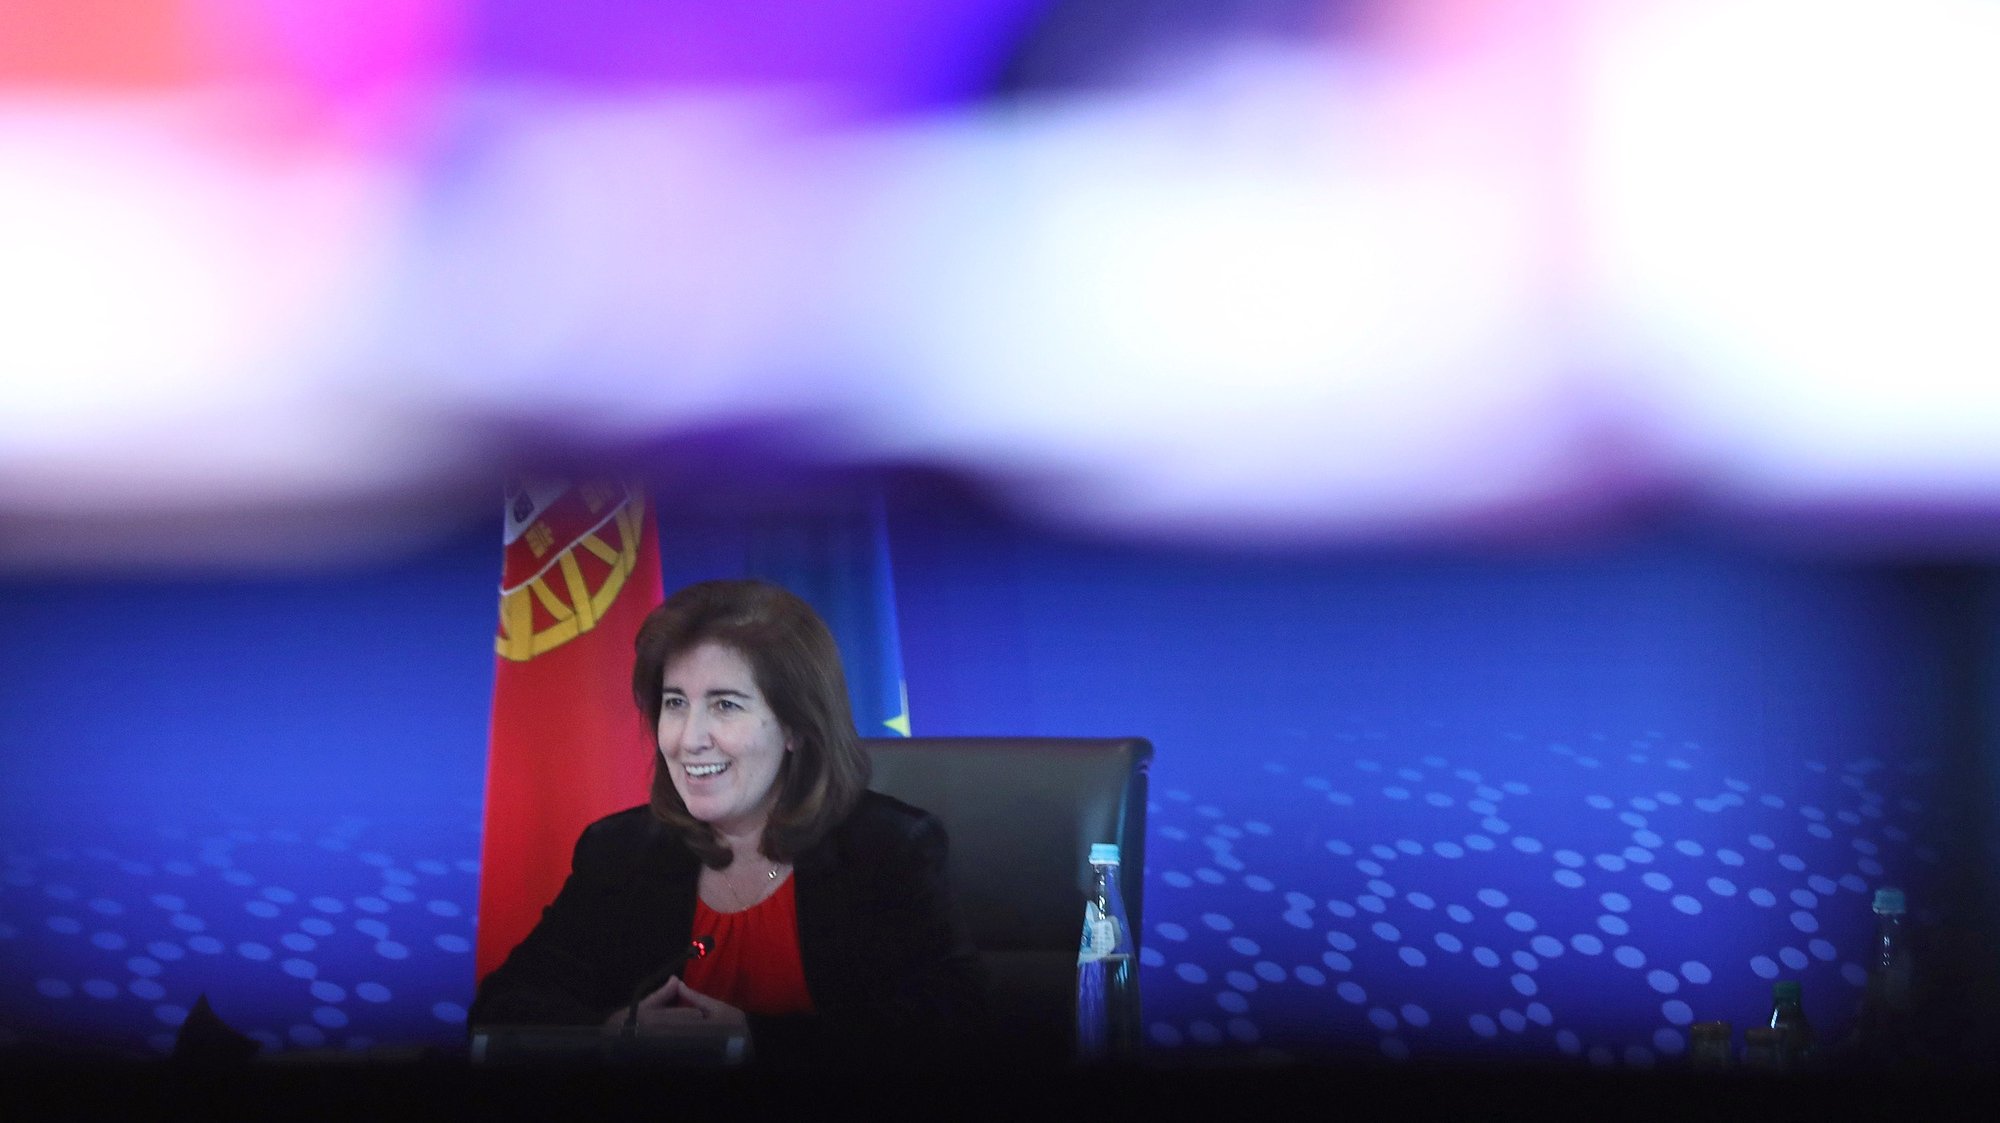 Portuguese Minister of Labour, Solidarity and Social Security, Ana Mendes Godinho during a virtual visit of journalists included in the official program of the Portuguese Presidency of the Council of the European Union in Lisbon, Portugal, 07 January 2021. During the first half of this year, Portugal will have its fourth presidency after 1992, 2000 and 2007. ANTÓNIO PEDRO SANTOS/LUSA